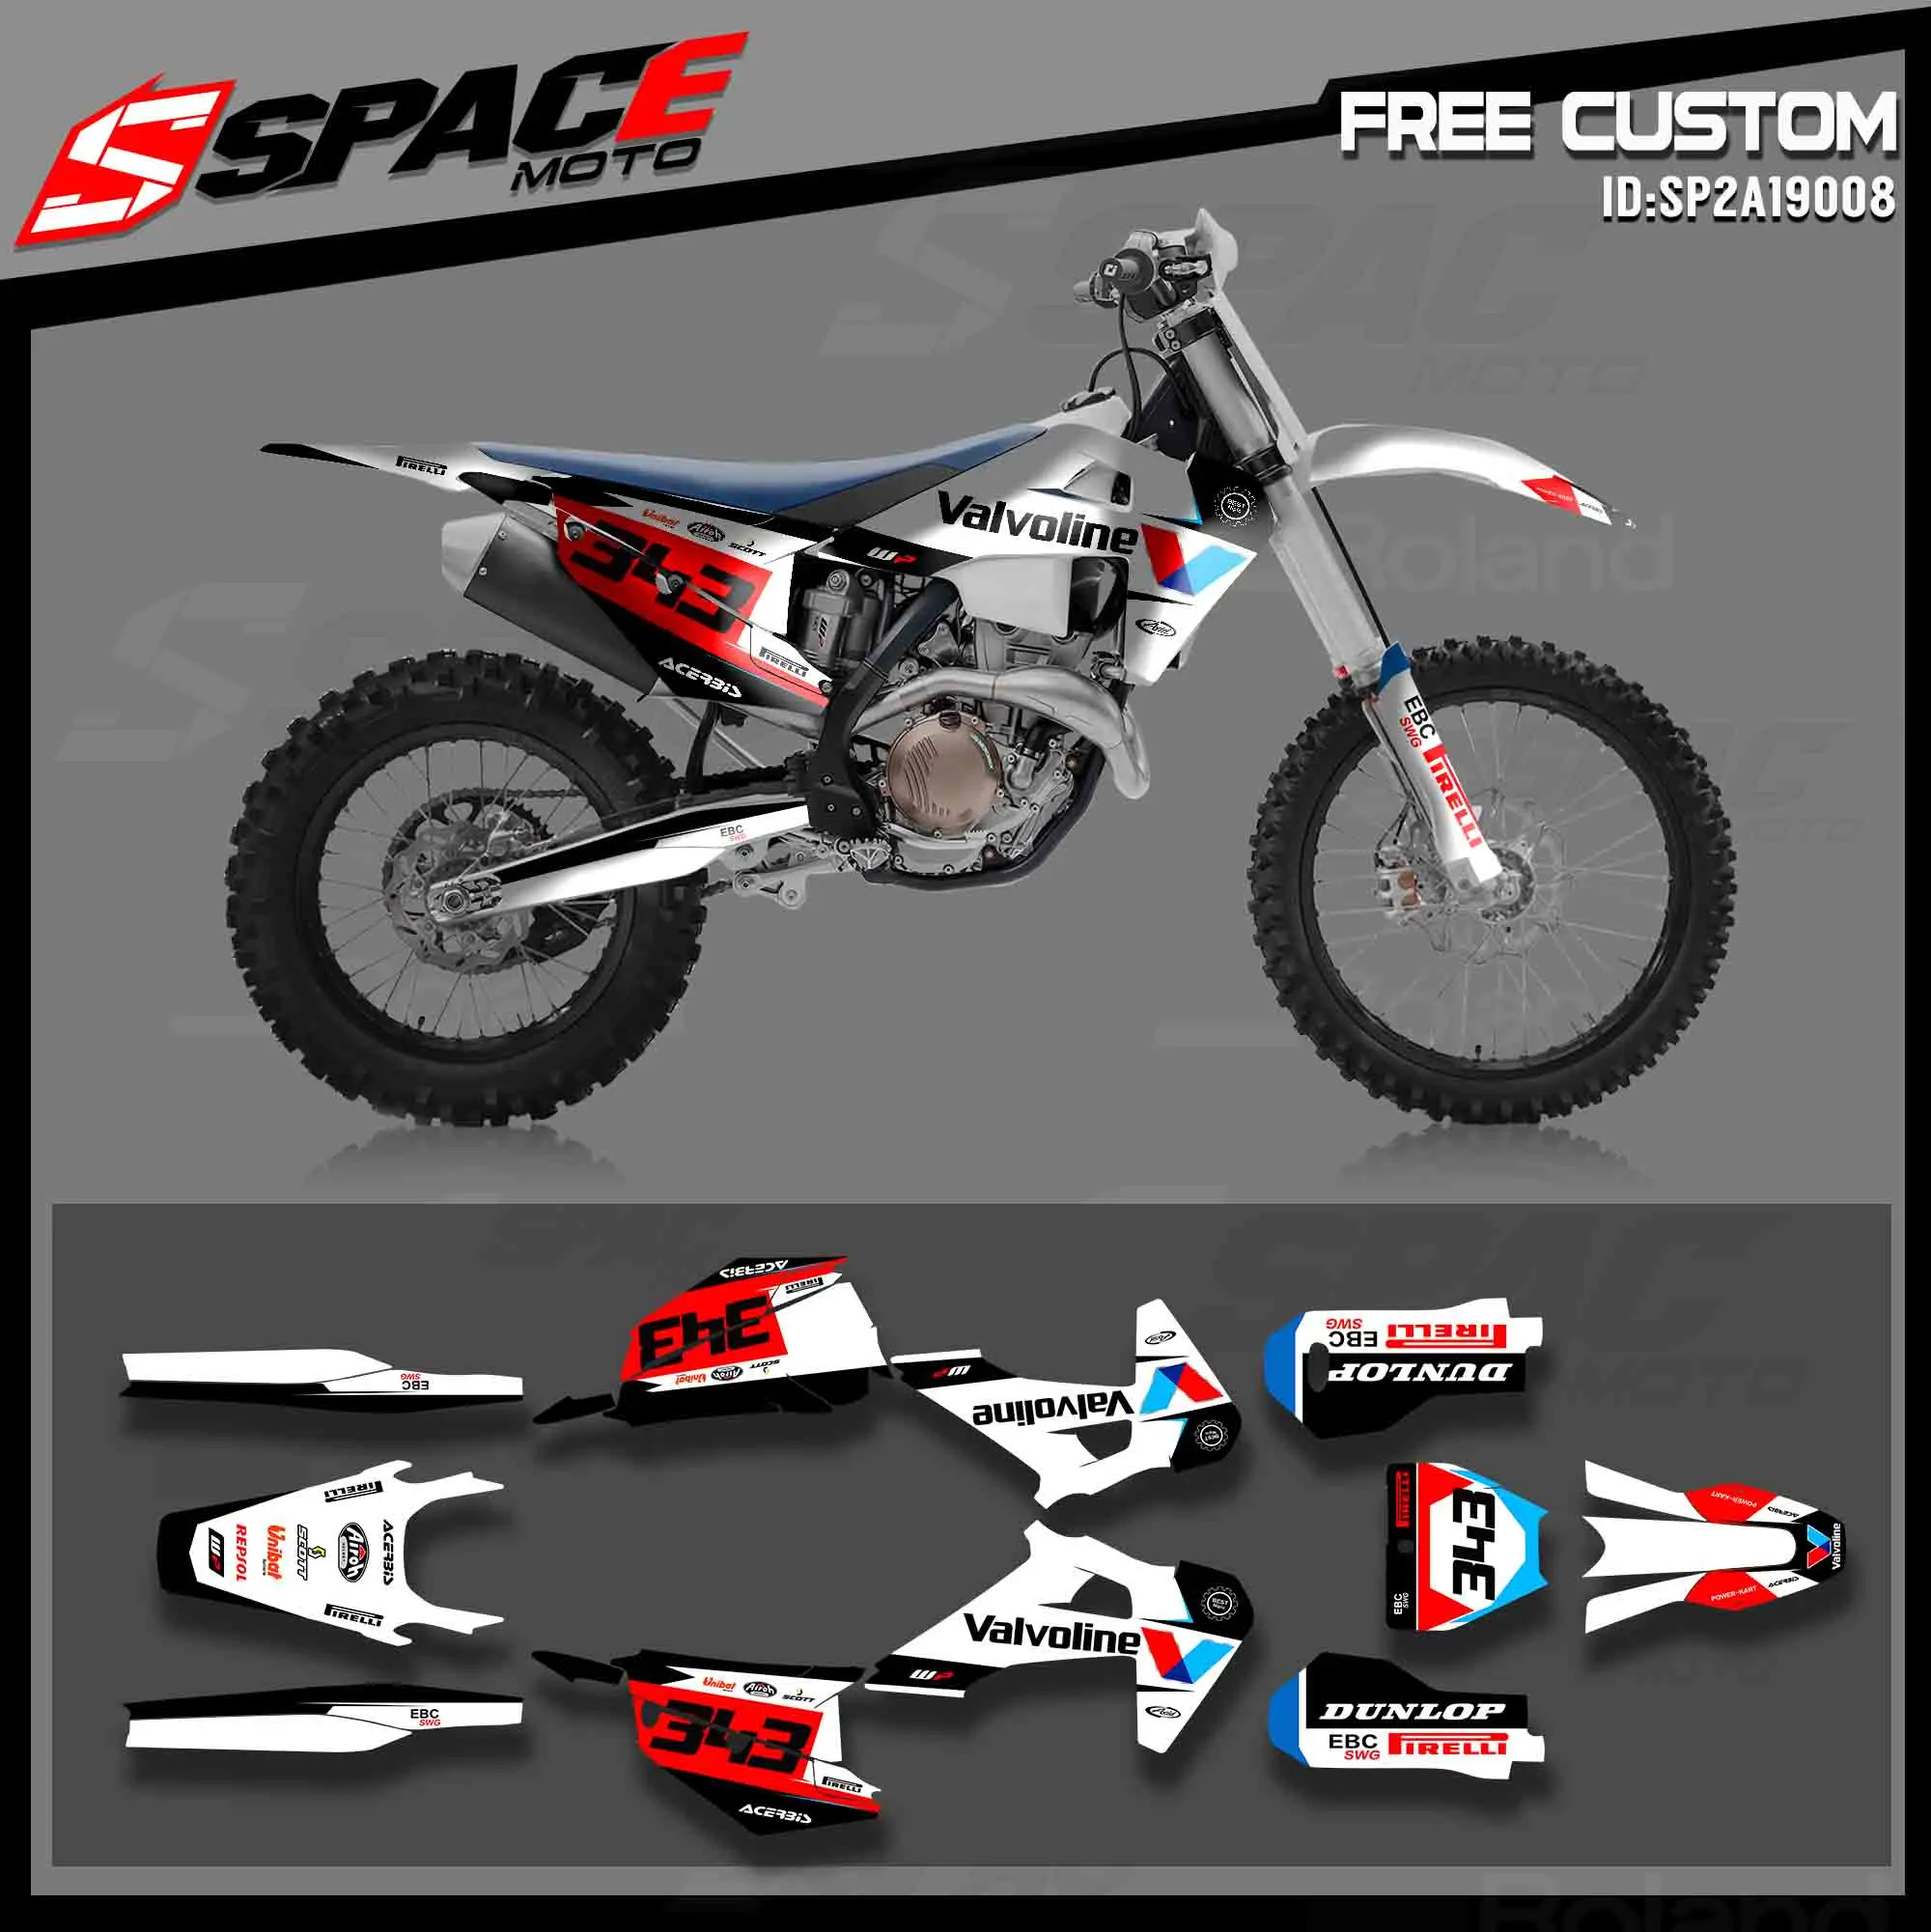 

SPACEMOTO Motorcycle Team Graphic Decal & Sticker Kit For Husqvarna TC FC TX FX FS 2019 2021 TE FE 2020 2022 Motocross Racing